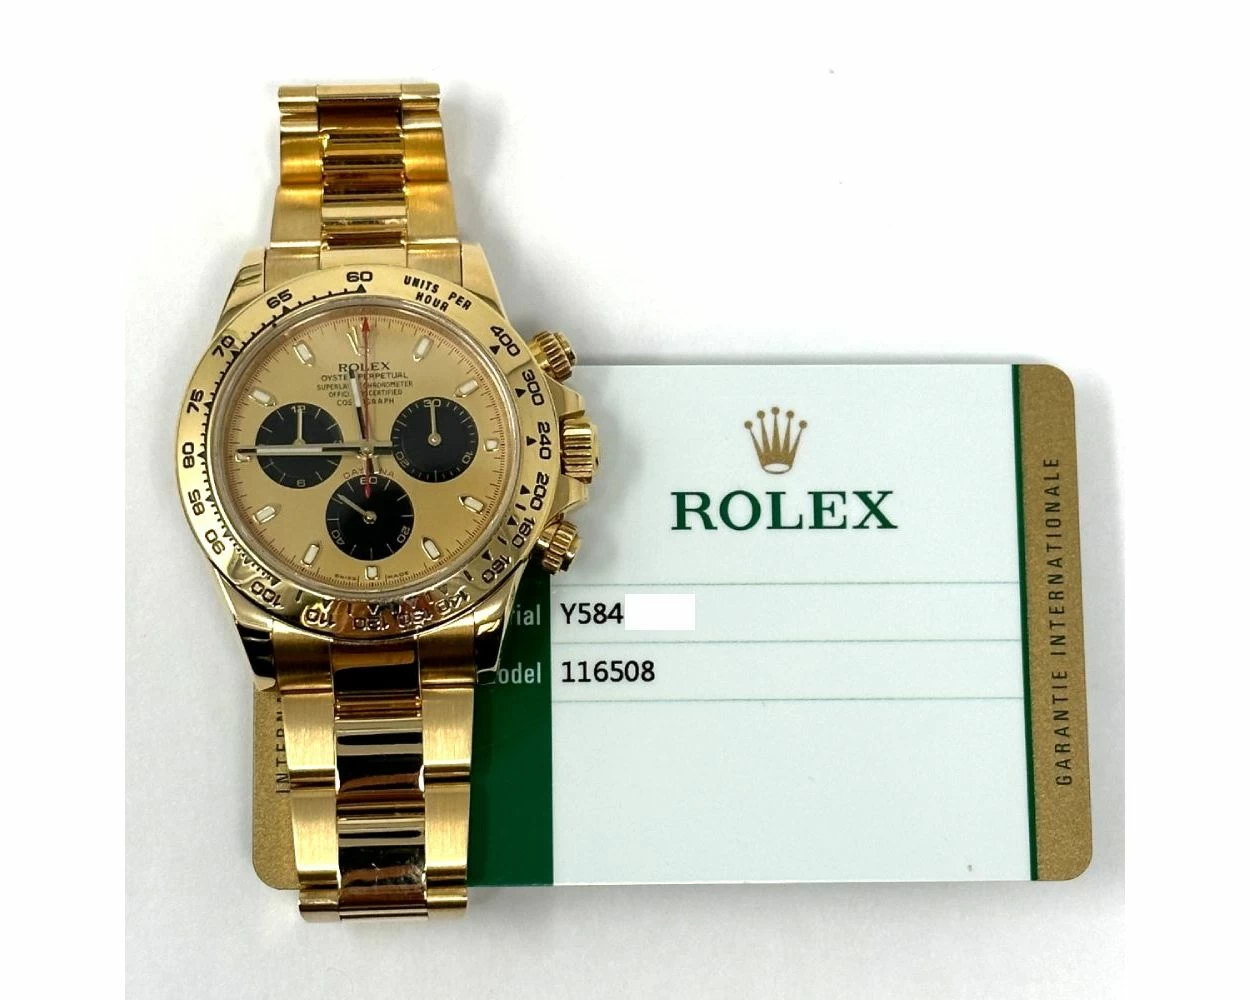 Rolex to Certify Pre-Owned Watches in Major Shift - Bloomberg